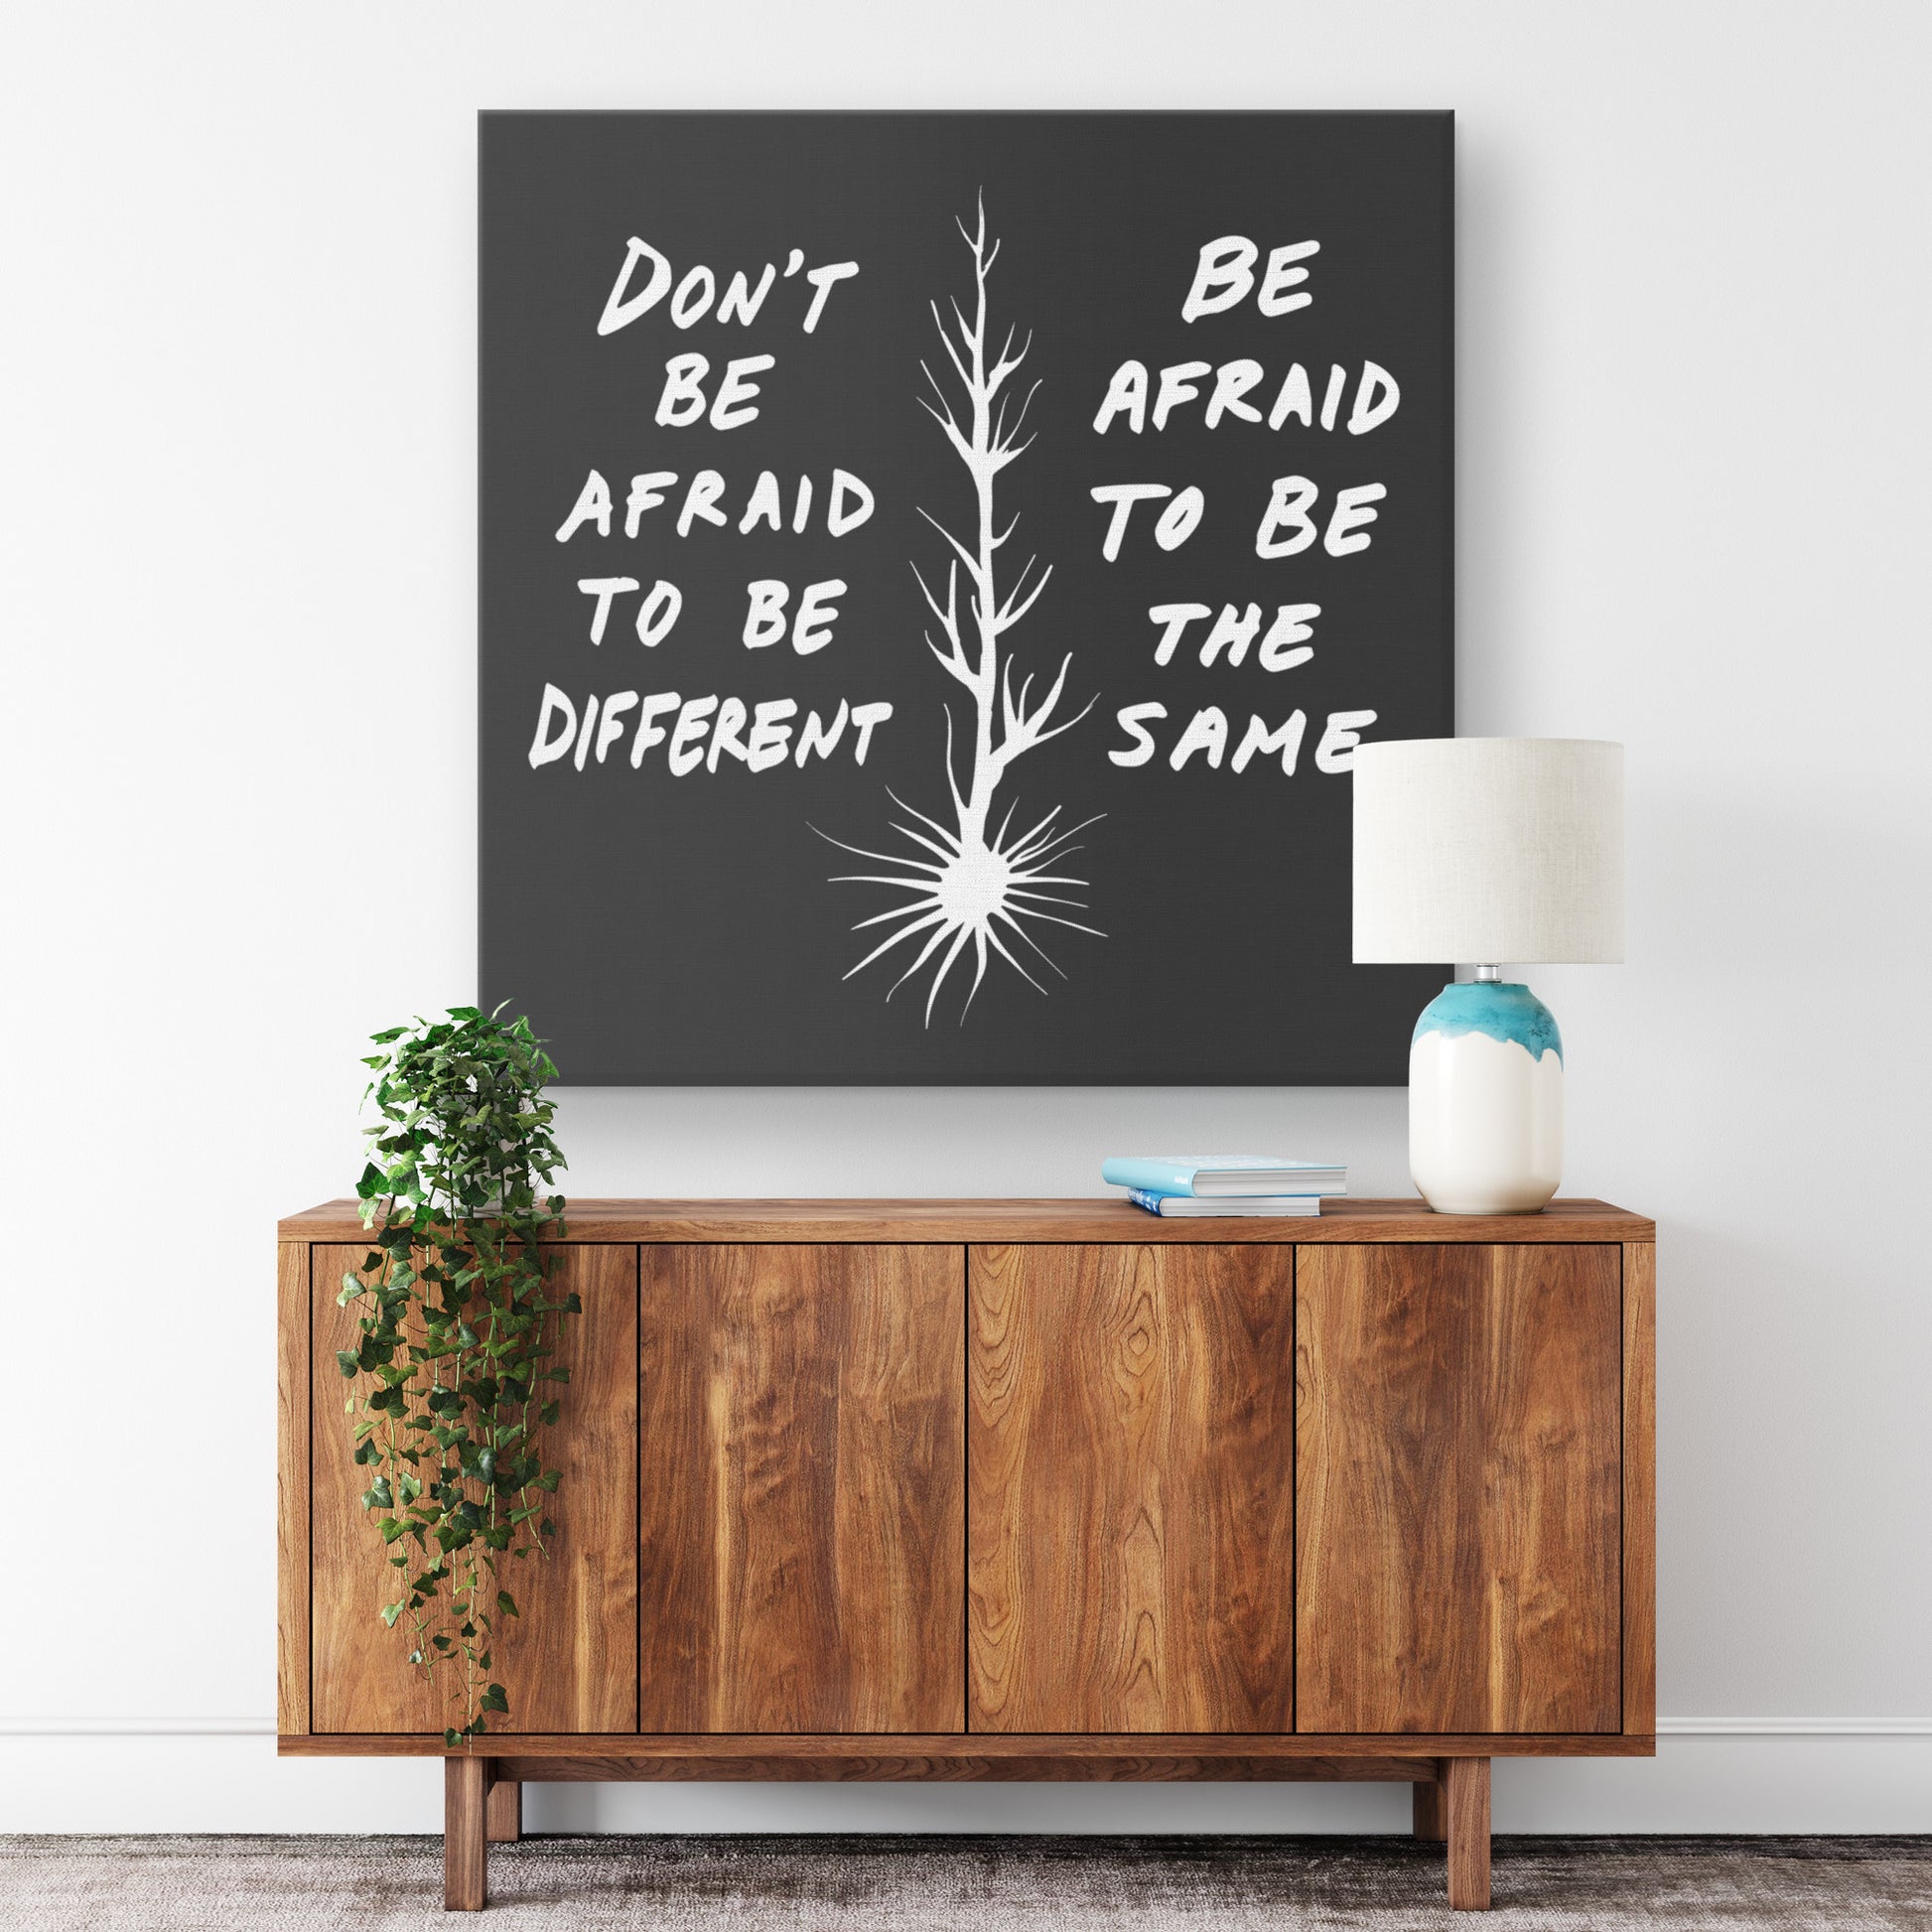 inspirational canvas quote art and decor from Michael Carini